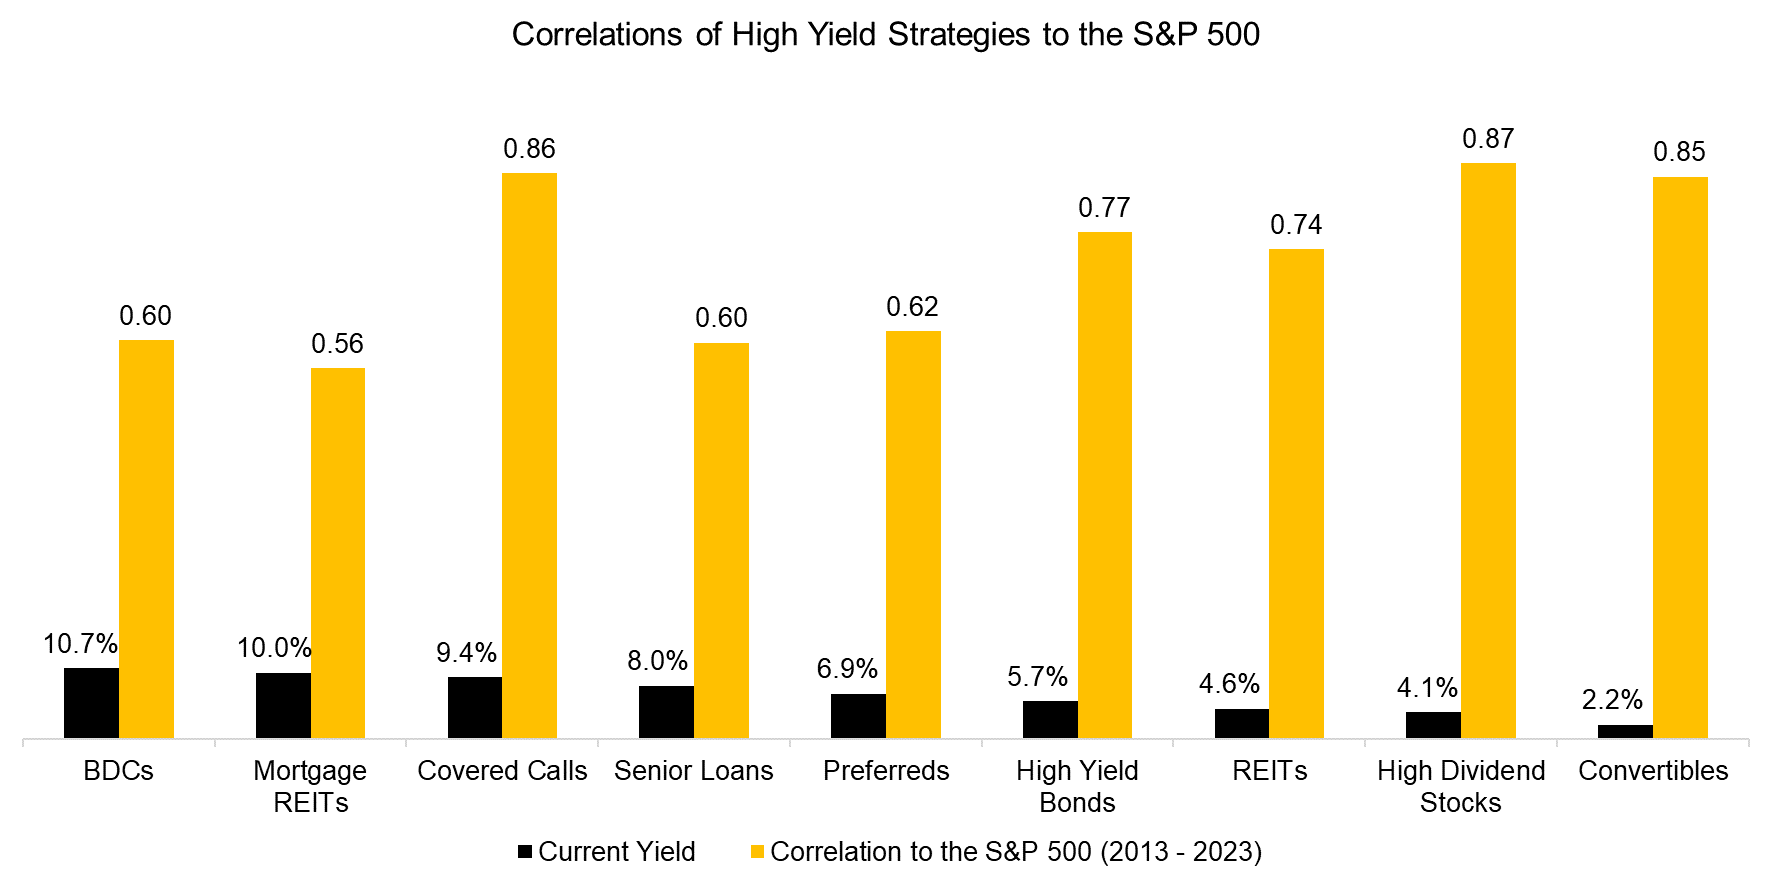 Correlations of High Yield Strategies to the S&P 500